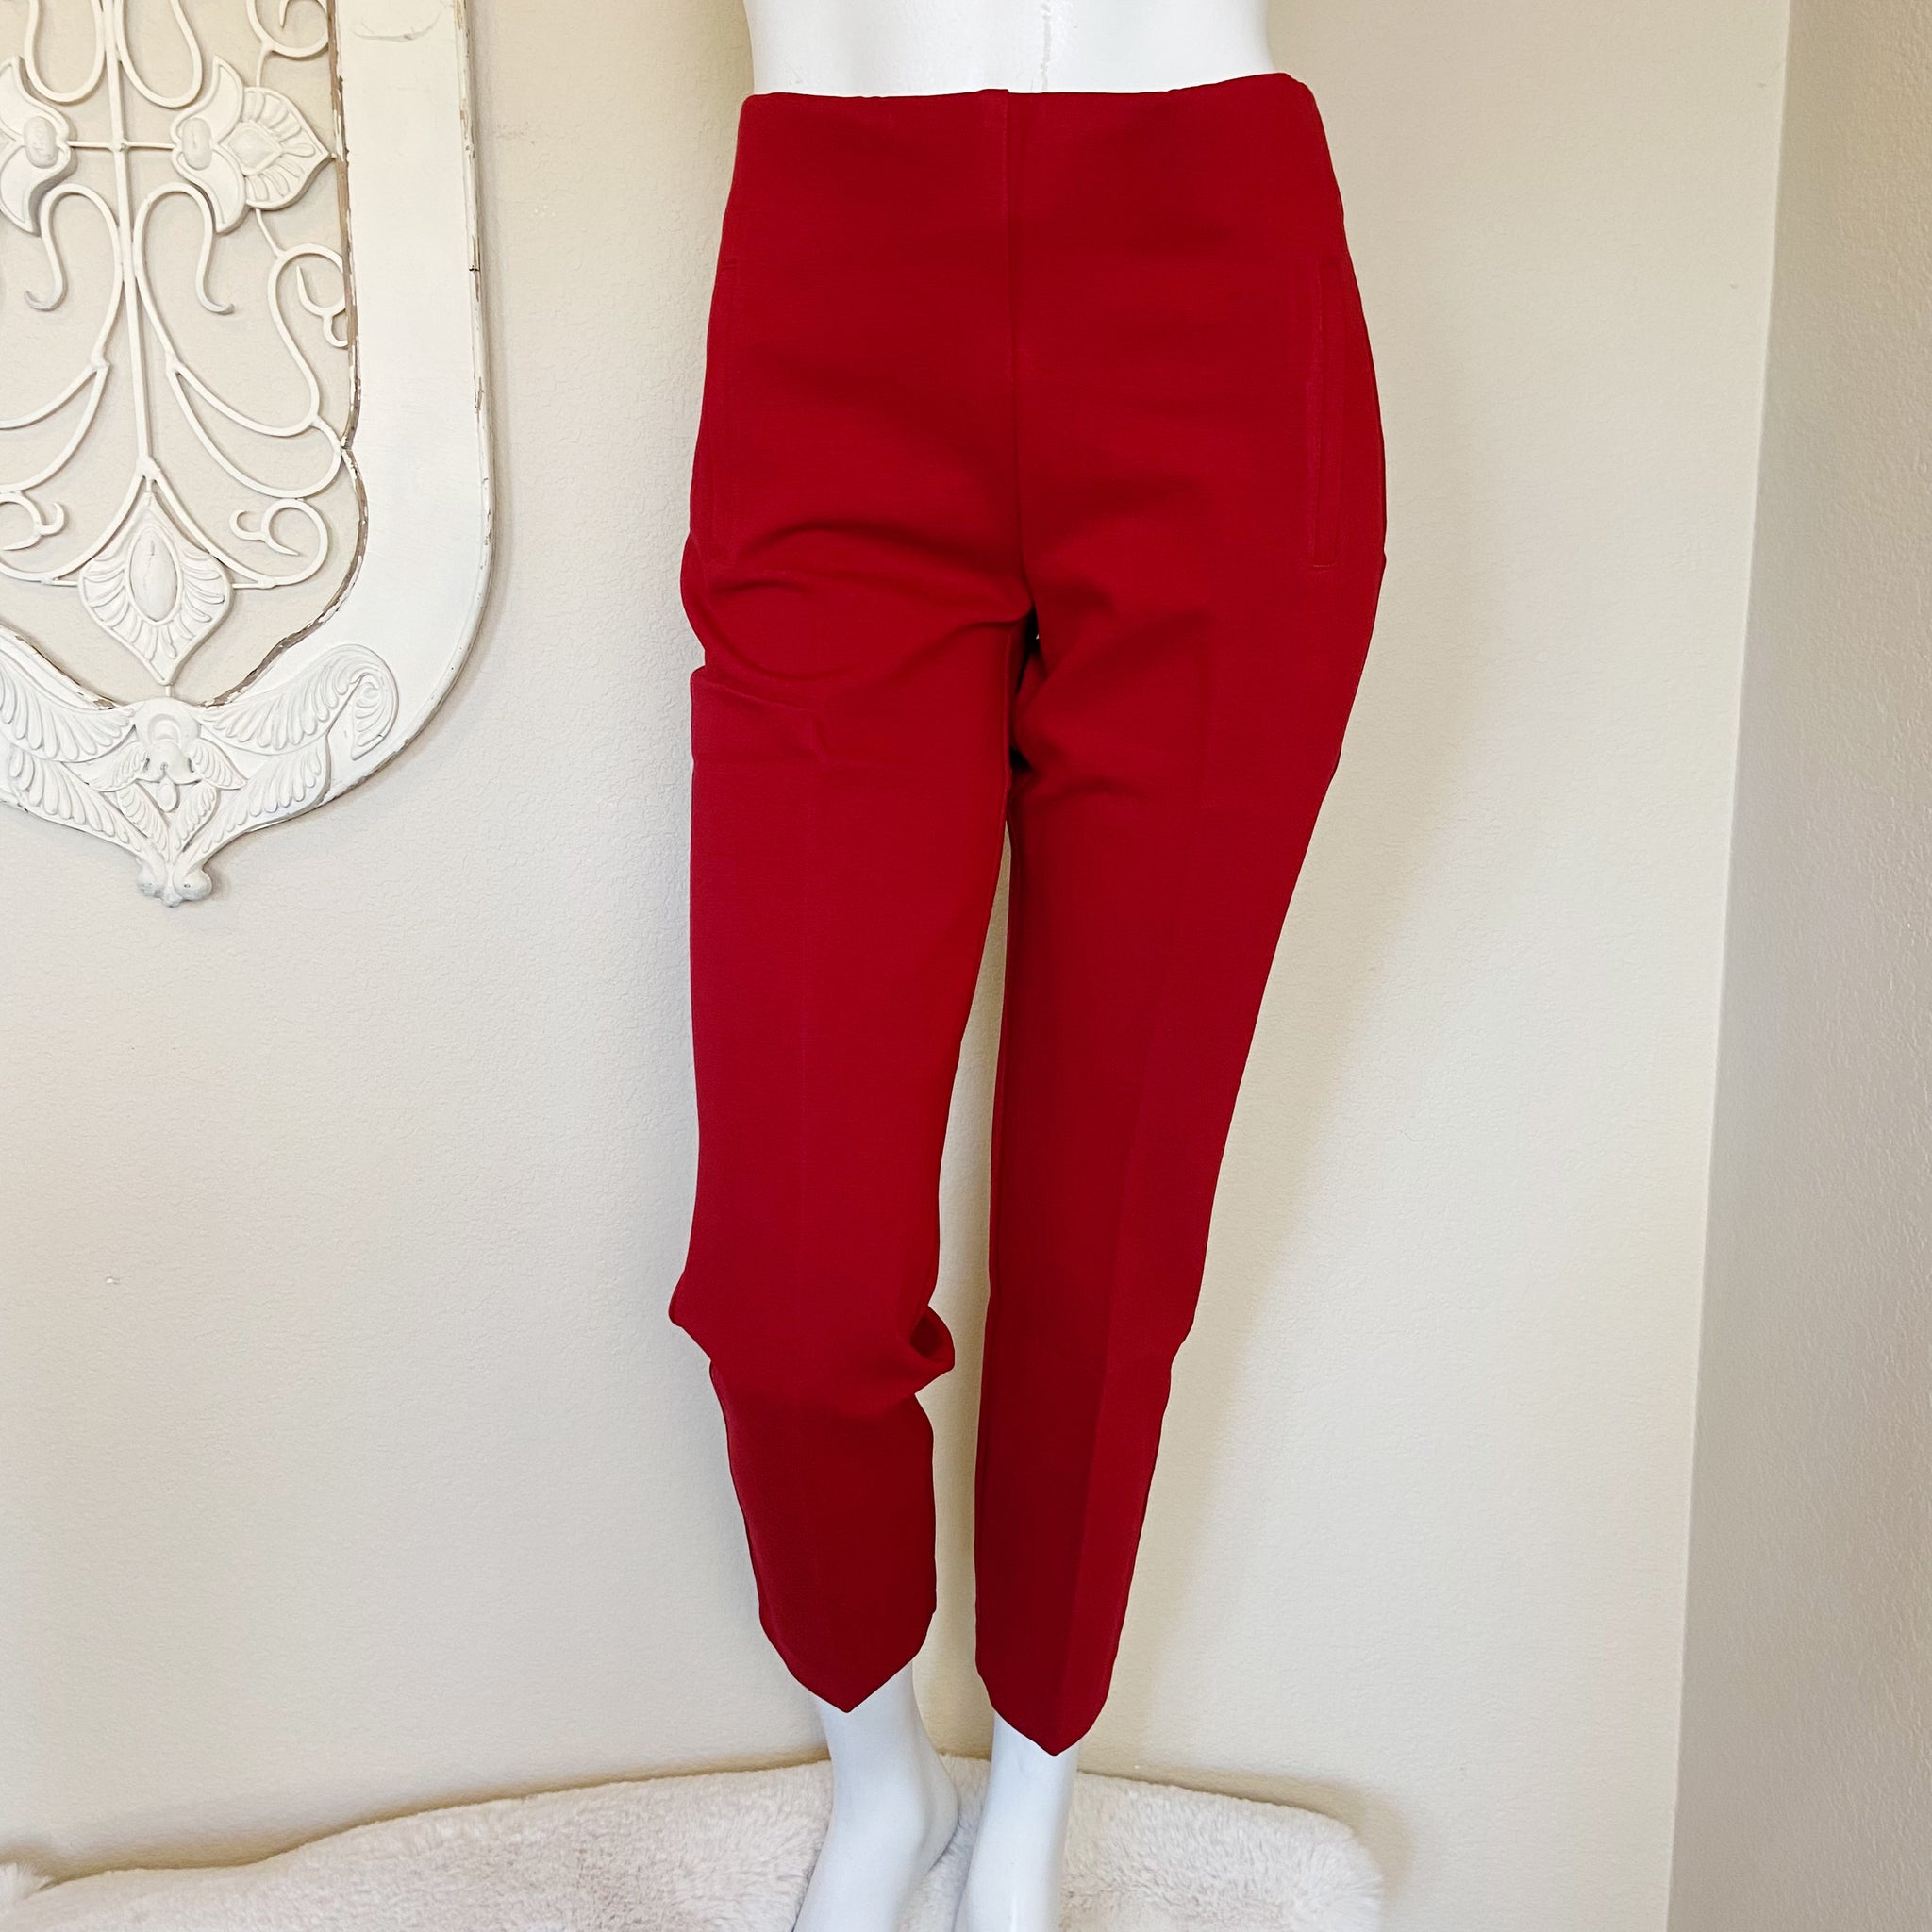 Chico's  Women's Enamel Red So Slimming Juliet Ankle Pants with